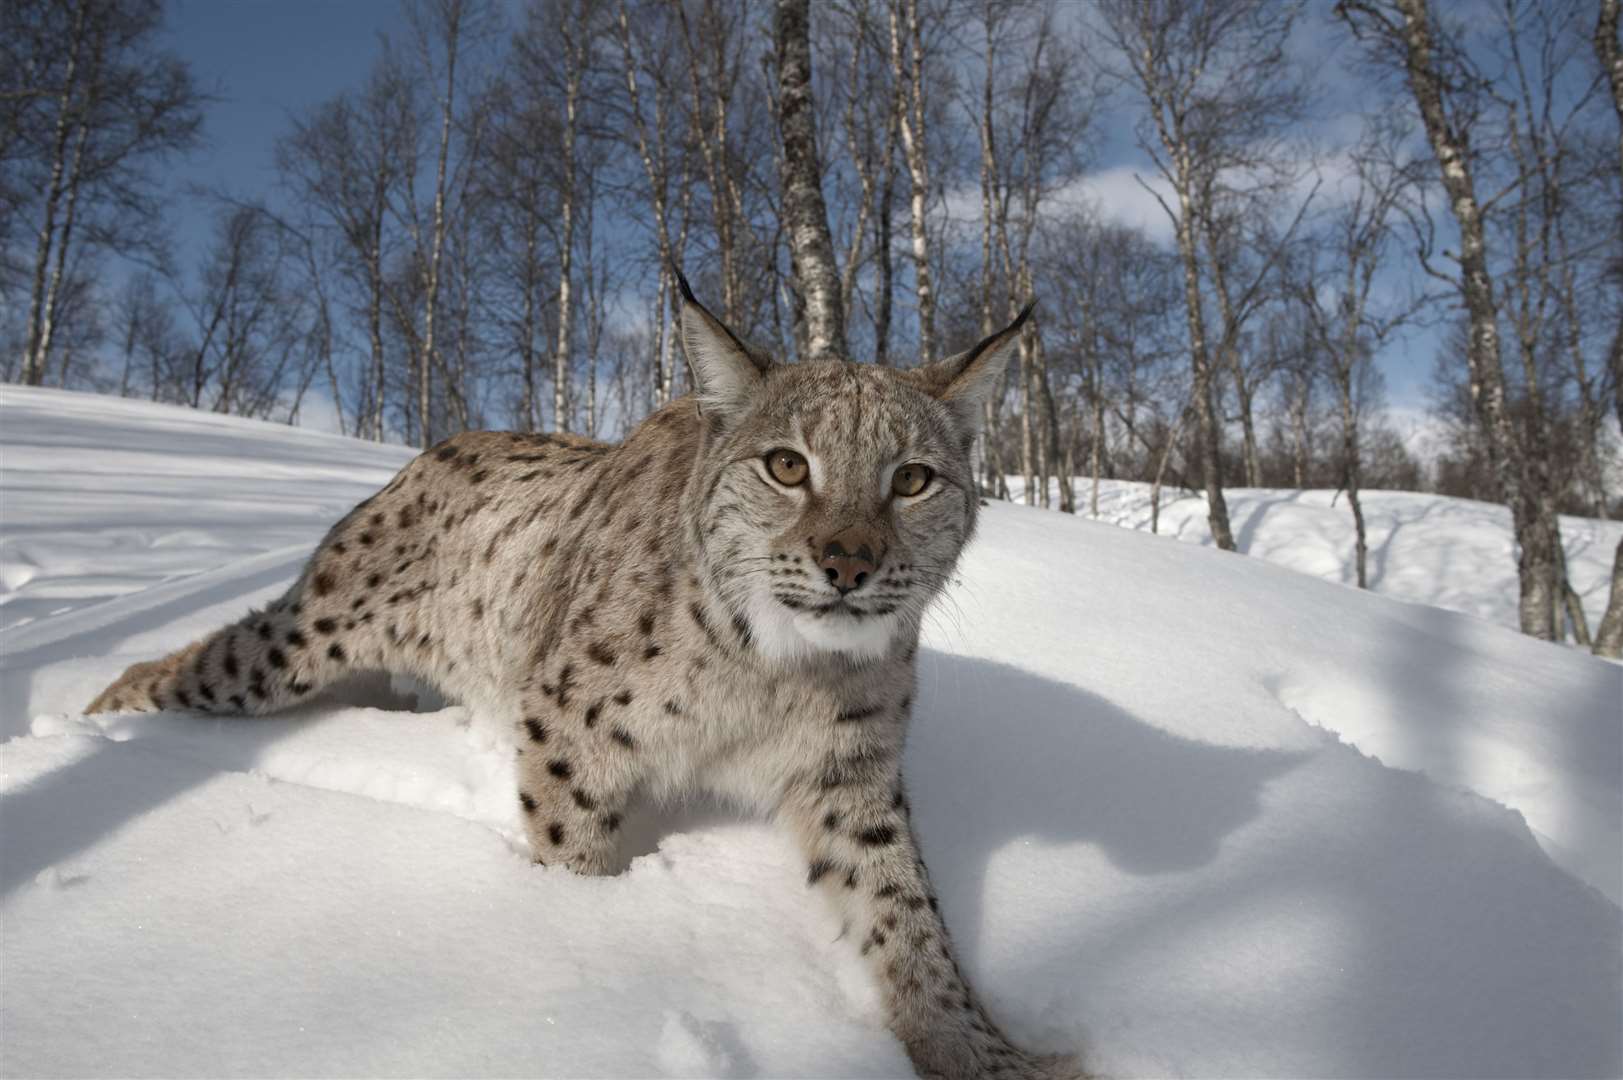 Long term plans could see the reintroduction of the lynx to parts of Scotland.